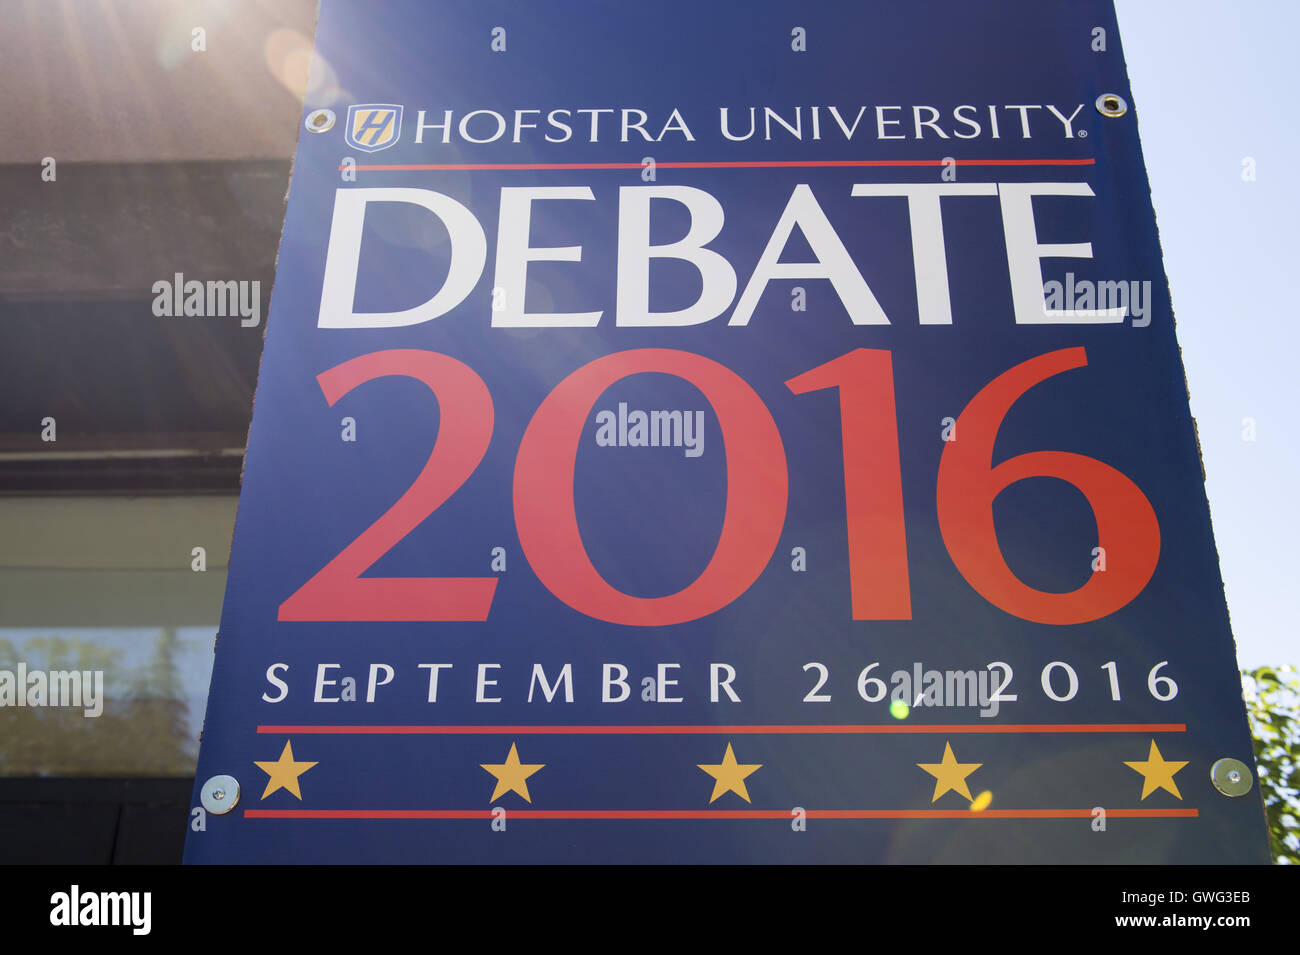 Hempstead, New York, USA. 13th Sep, 2016. Hofstra University Debate 2016 banner, in patriotic red white and blue, is one of many displayed on the campus of Hofstra University, which will host the first Presidential Debate, between H.R. Clinton and D. J. Trump, scheduled for later that month on September 26. Hofstra is first university ever selected for 3 consecutive U.S. presidential debates. © Ann Parry/ZUMA Wire/Alamy Live News Stock Photo